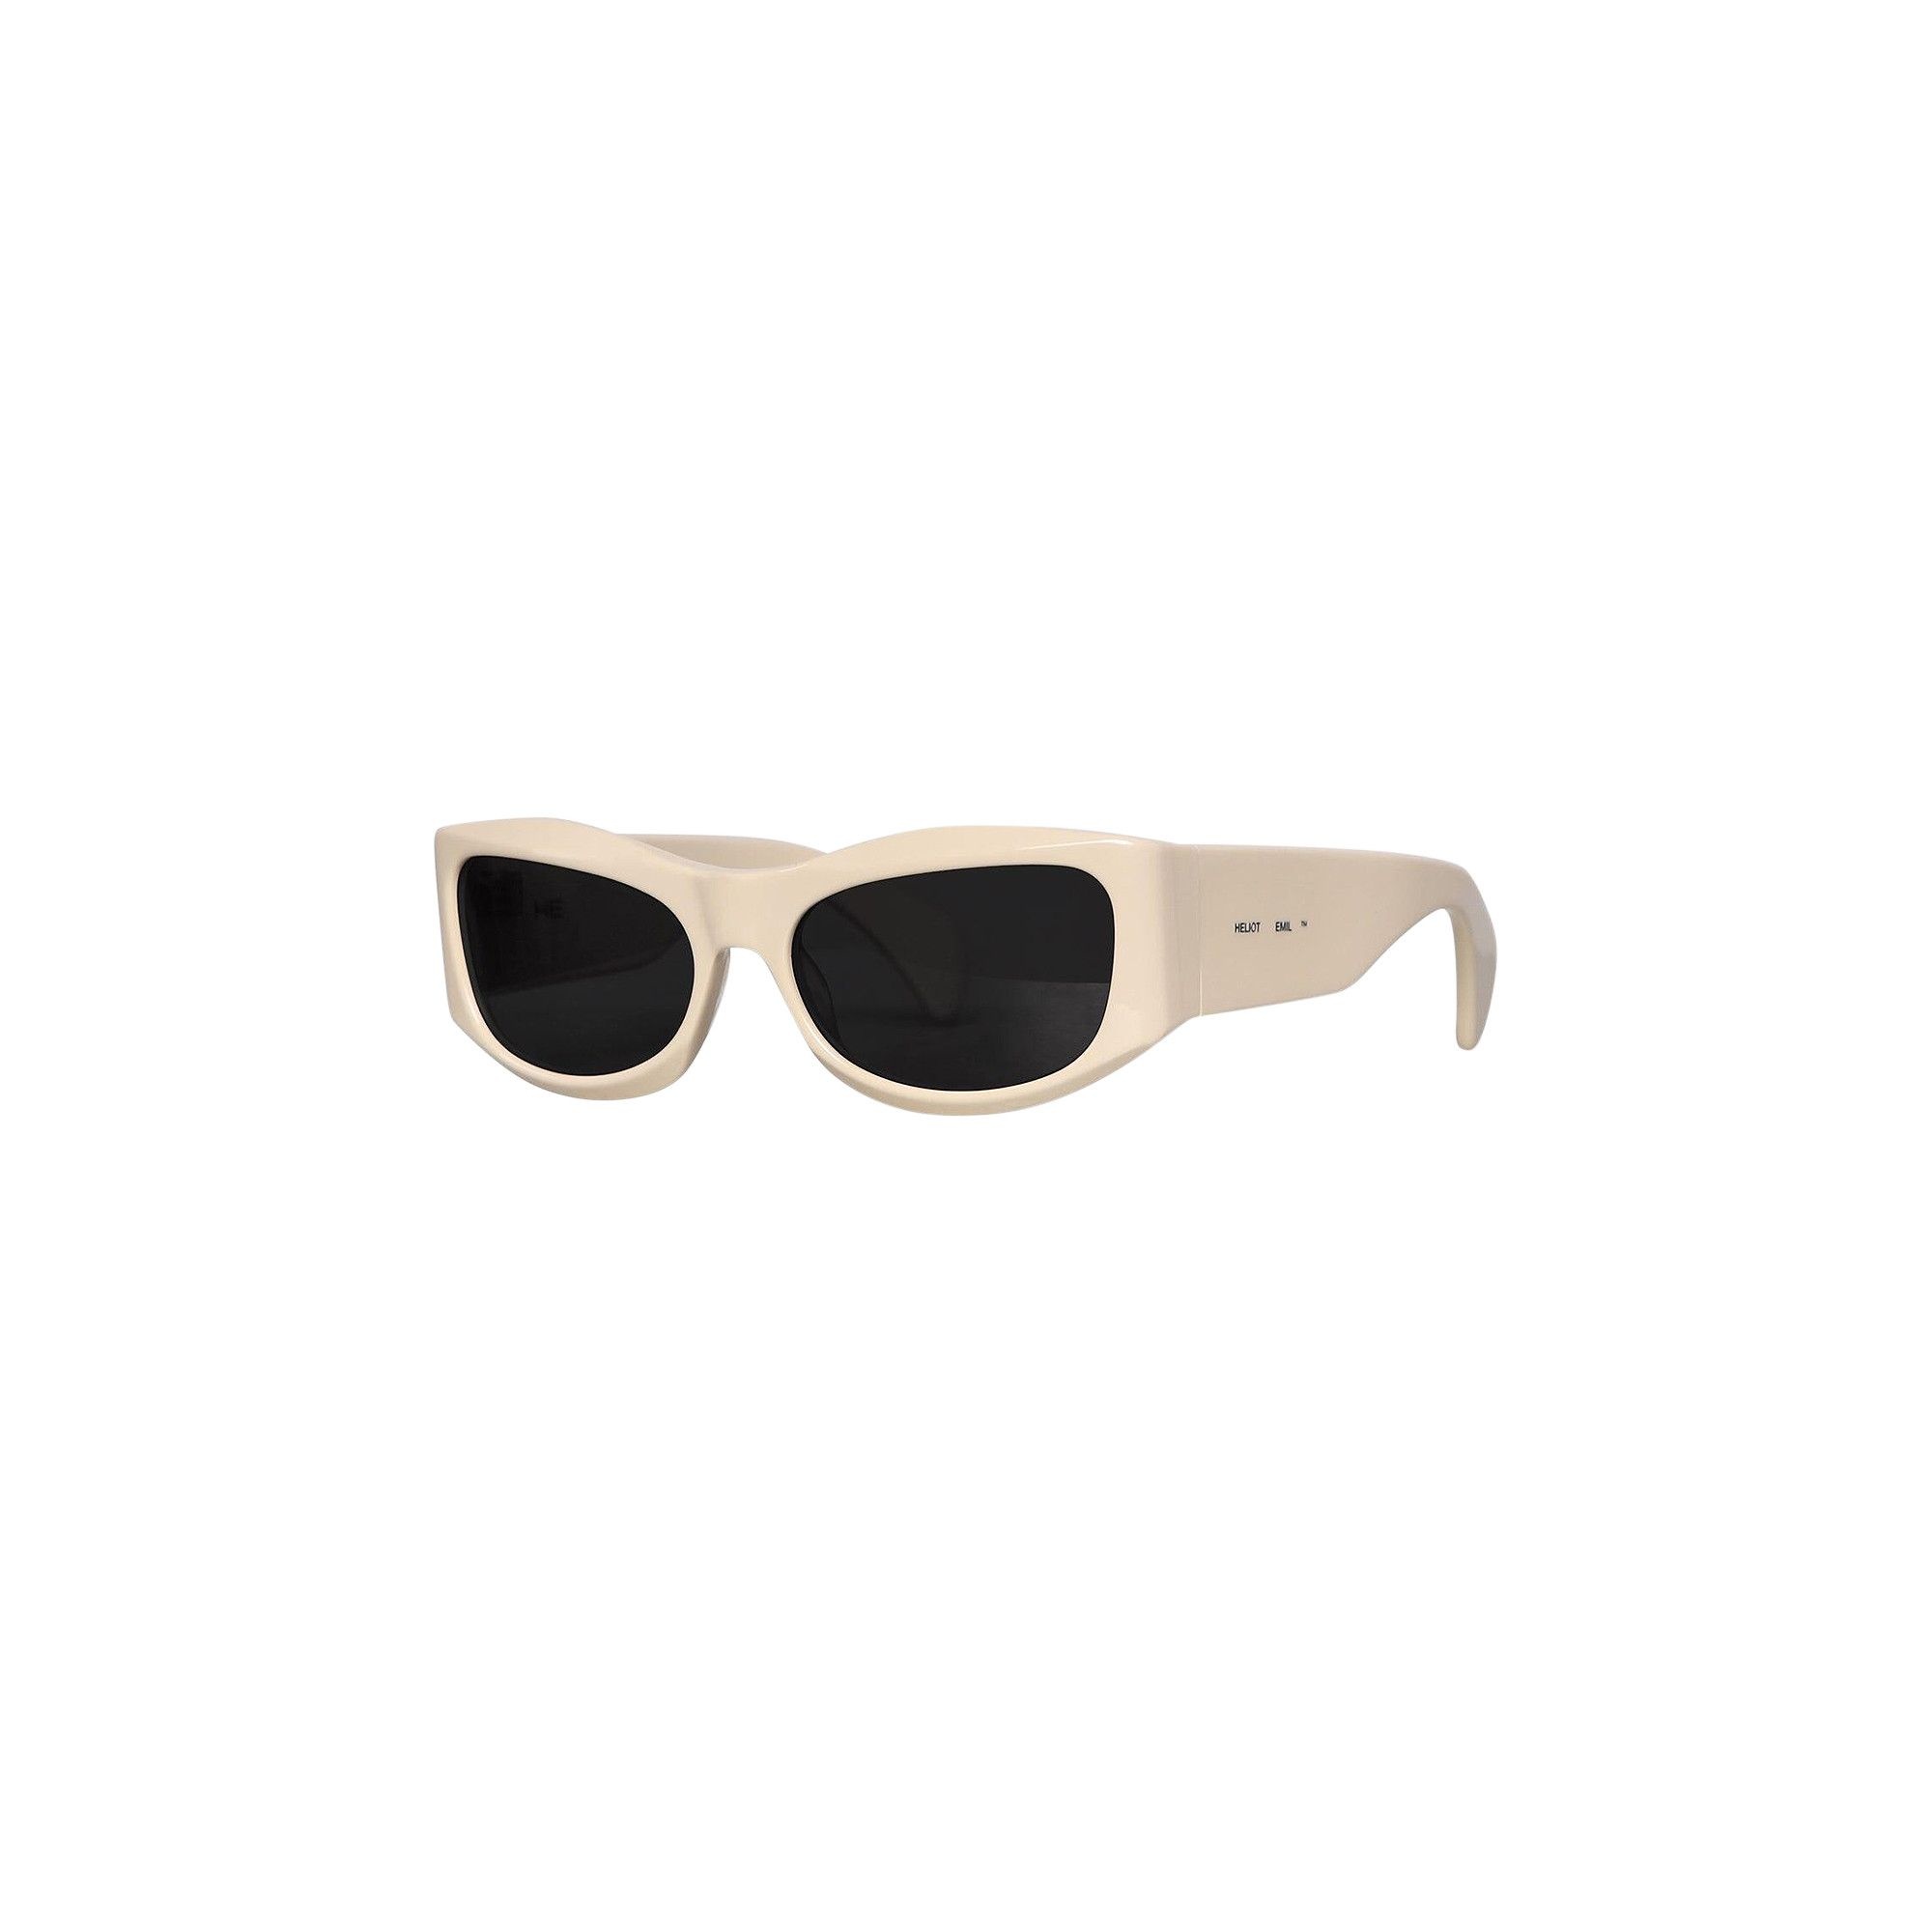 Heliot Emil Aether Sunglasses 'Stone' - 3